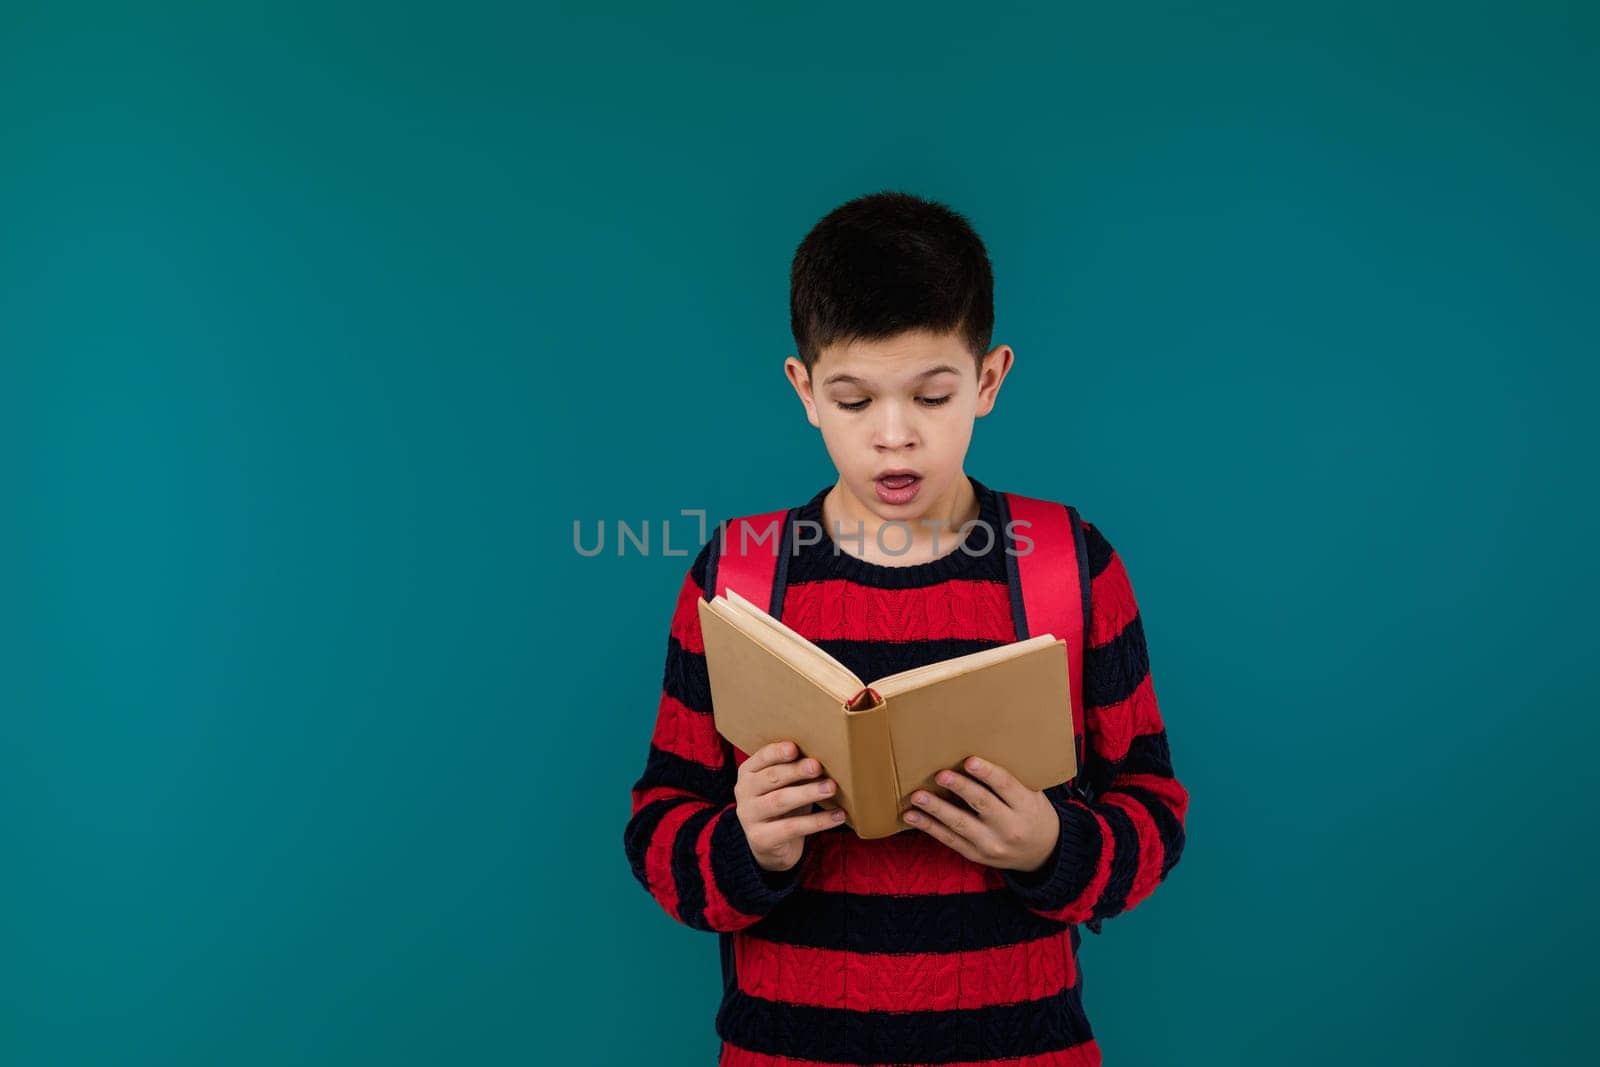 little cheerful school boy reading interesting book over blue background, copy space. School concept.